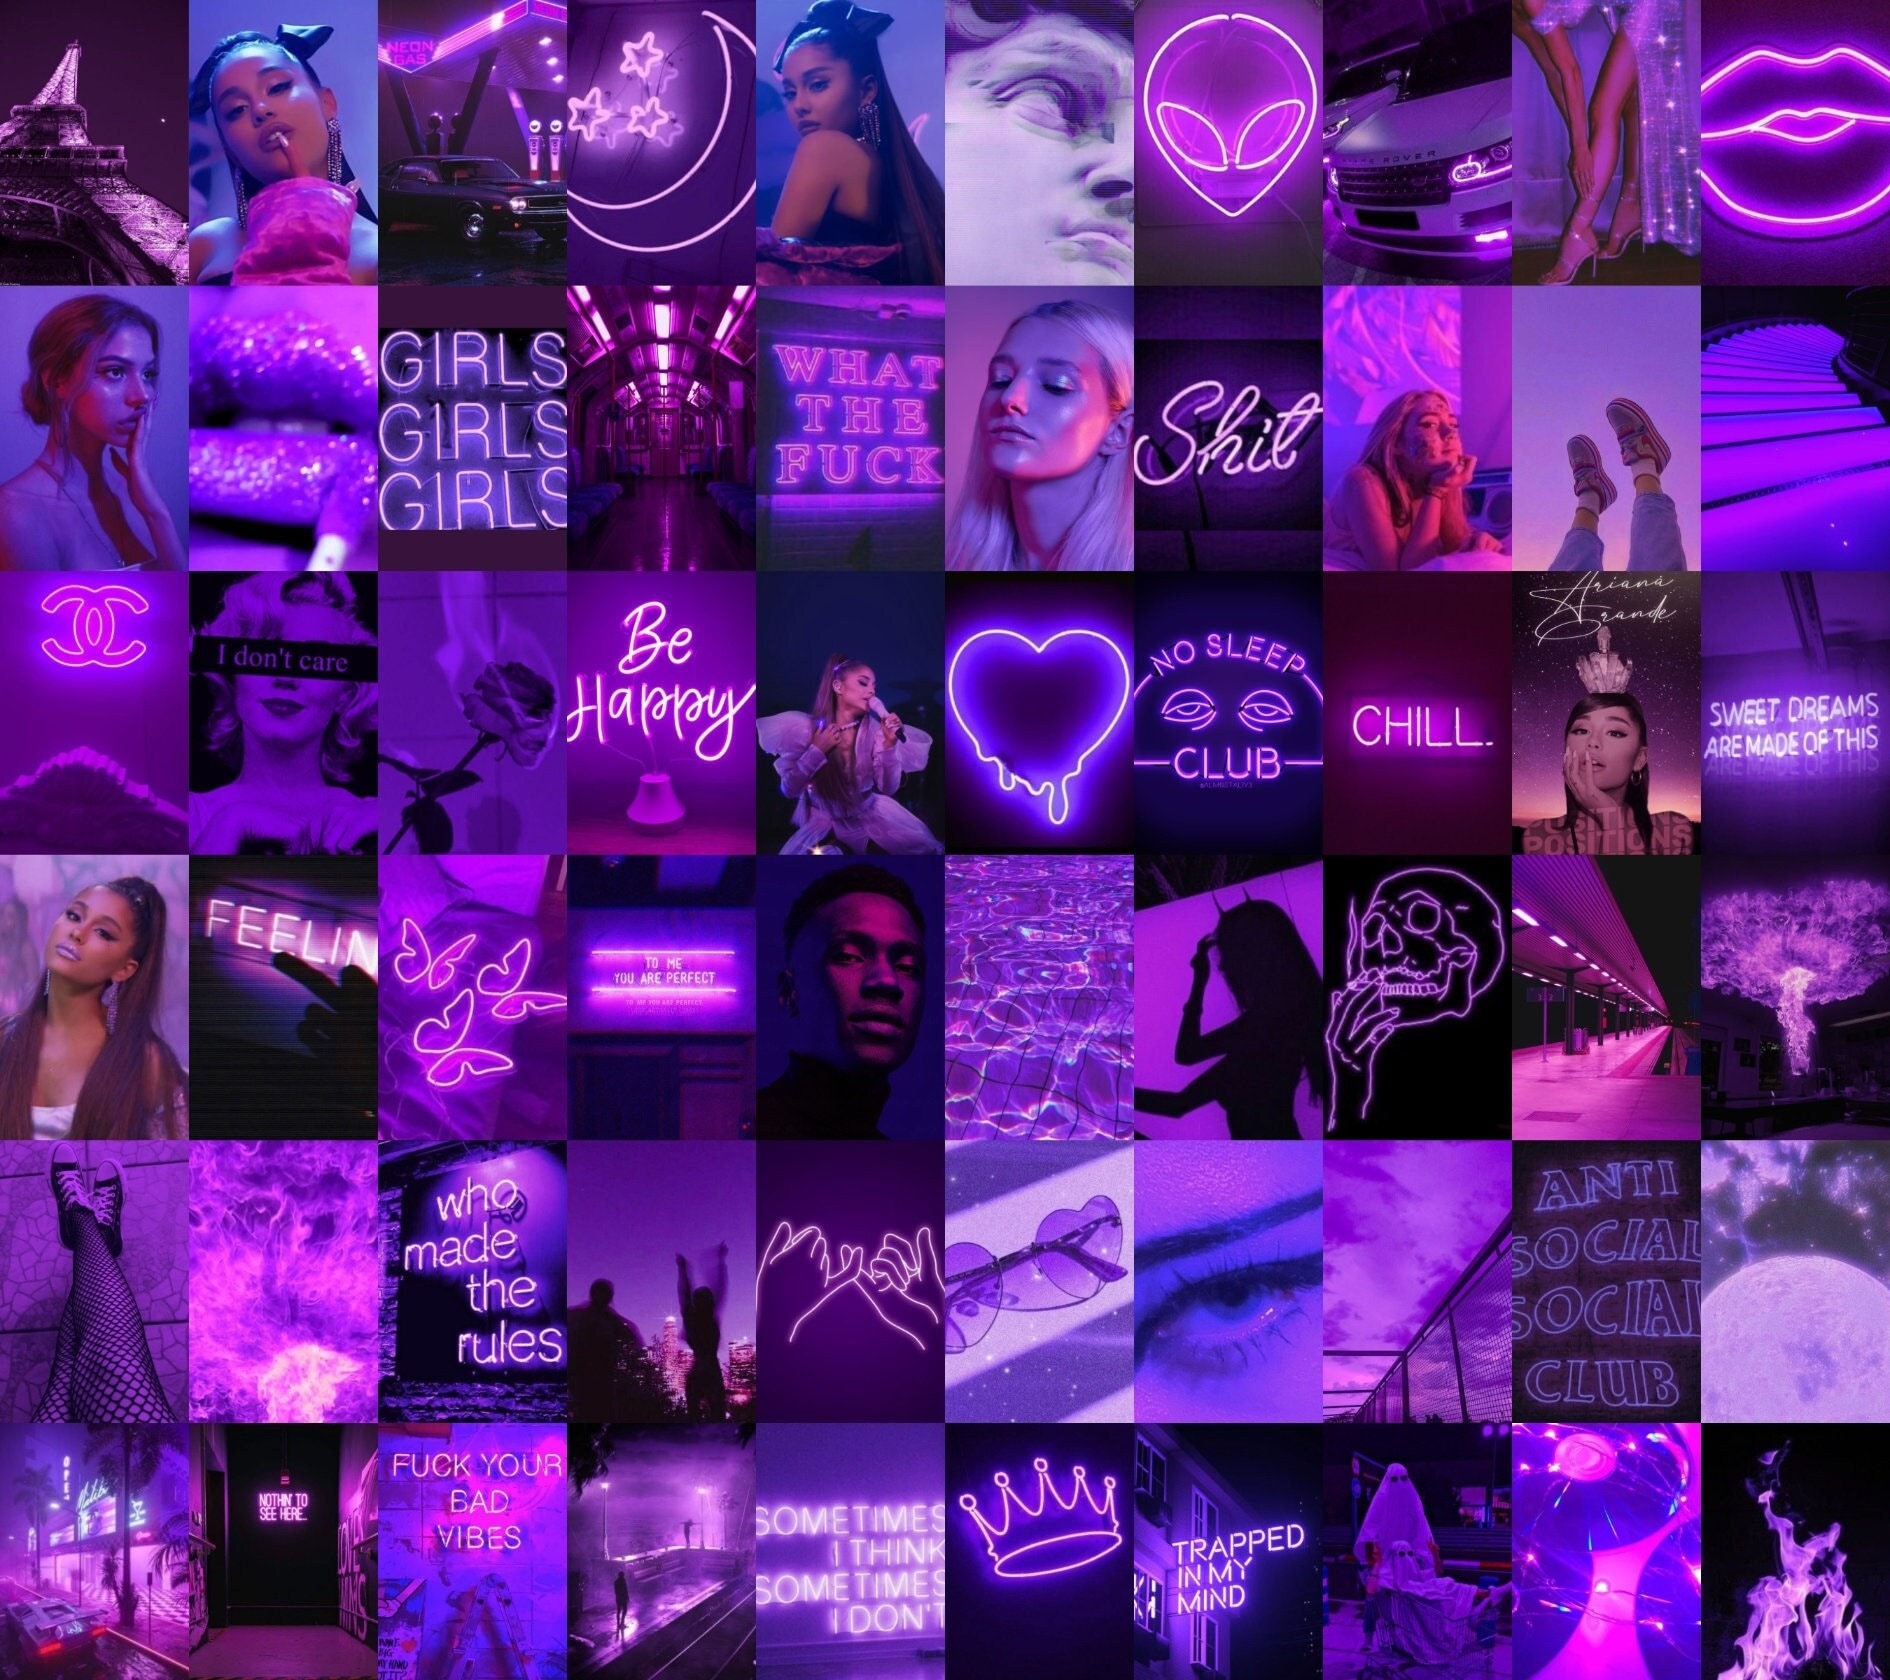 Aesthetic background of purple neon lights, girls, and motivational quotes. - Collage